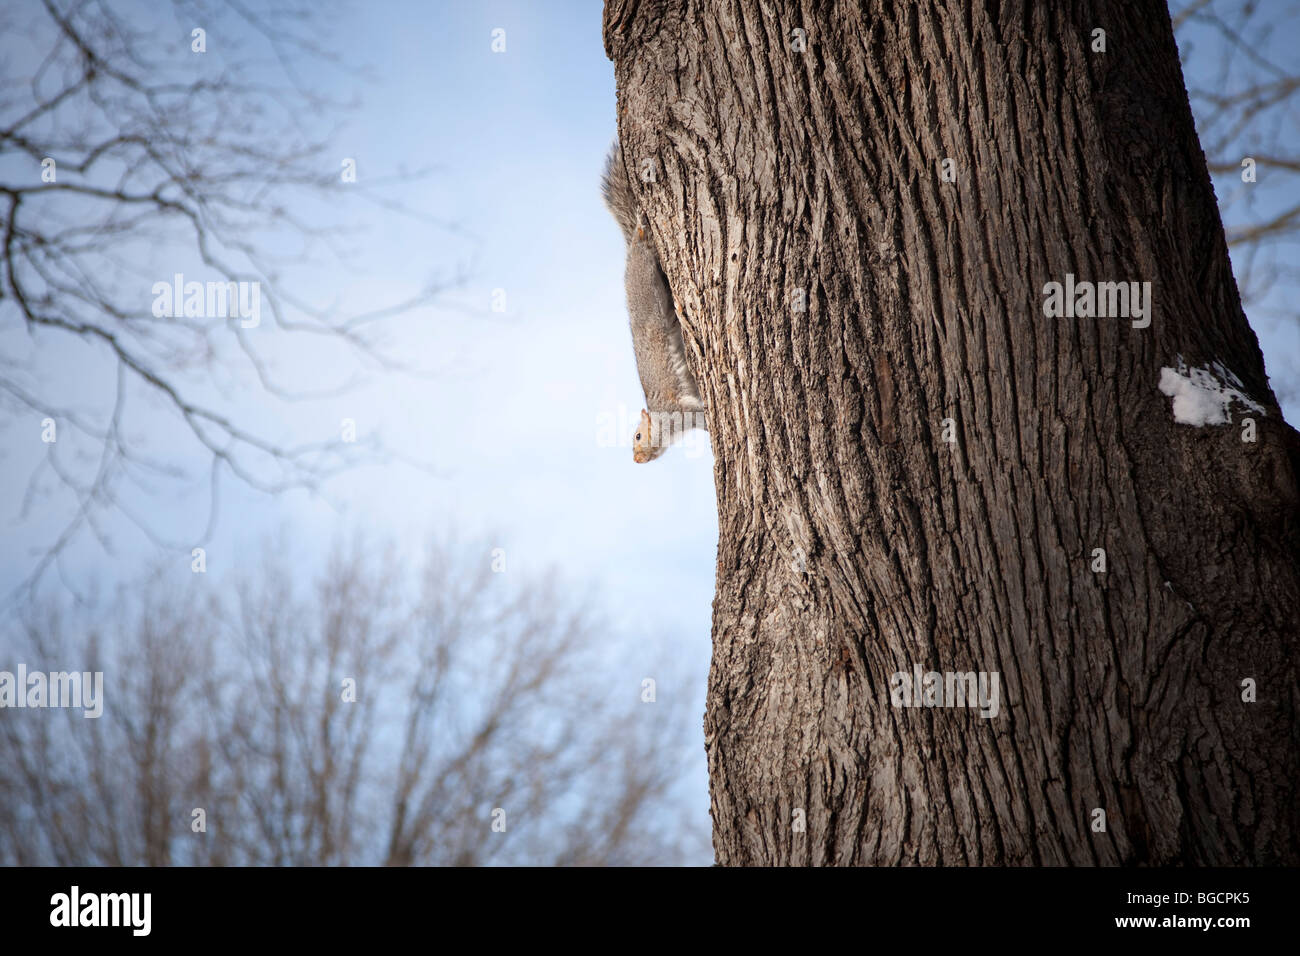 A squirrel hangs from the side of a tree trunk in Central Park in New York USA 20 December 2009 Stock Photo